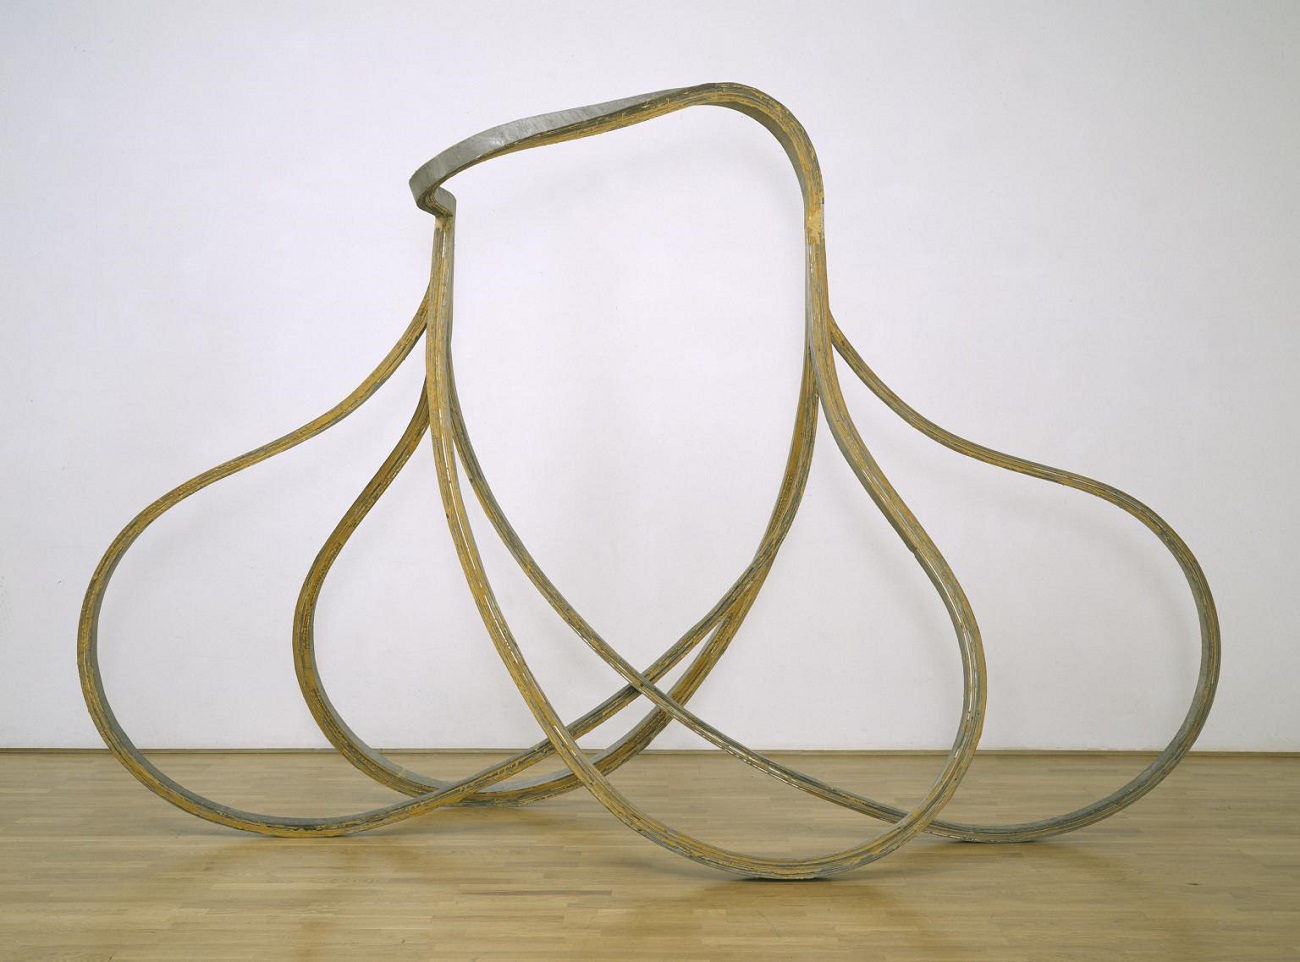 RICHARD DEACON For Those Who Have Ears #2 1983 by Richard Deacon born 1949